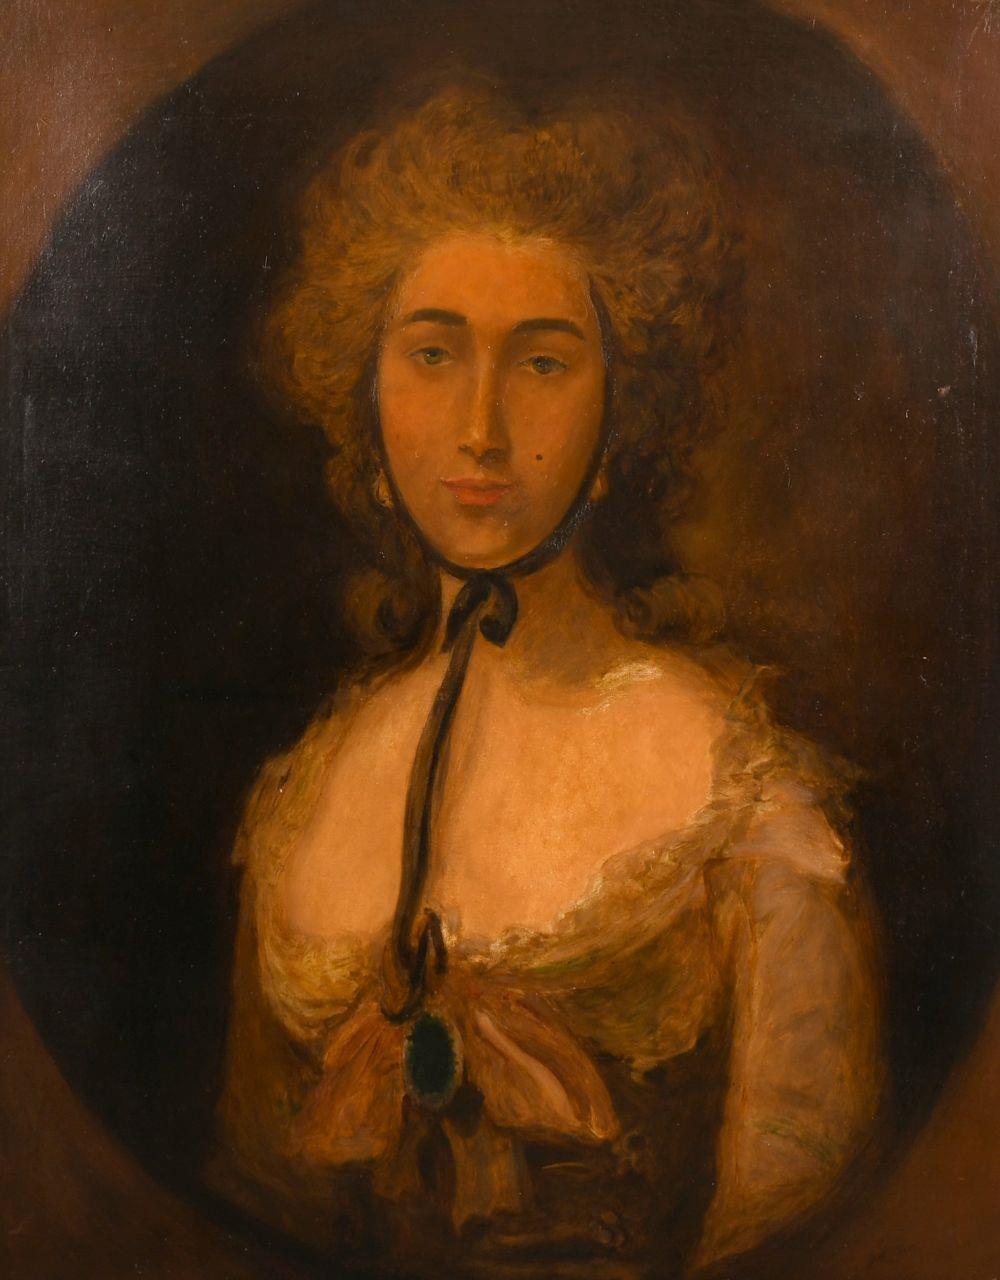 FINE EARLY 1800'S PORTRAIT OF A LADY - AFTER GAINSBOROUGH - LARGE OIL PAINTING - Painting by Unknown